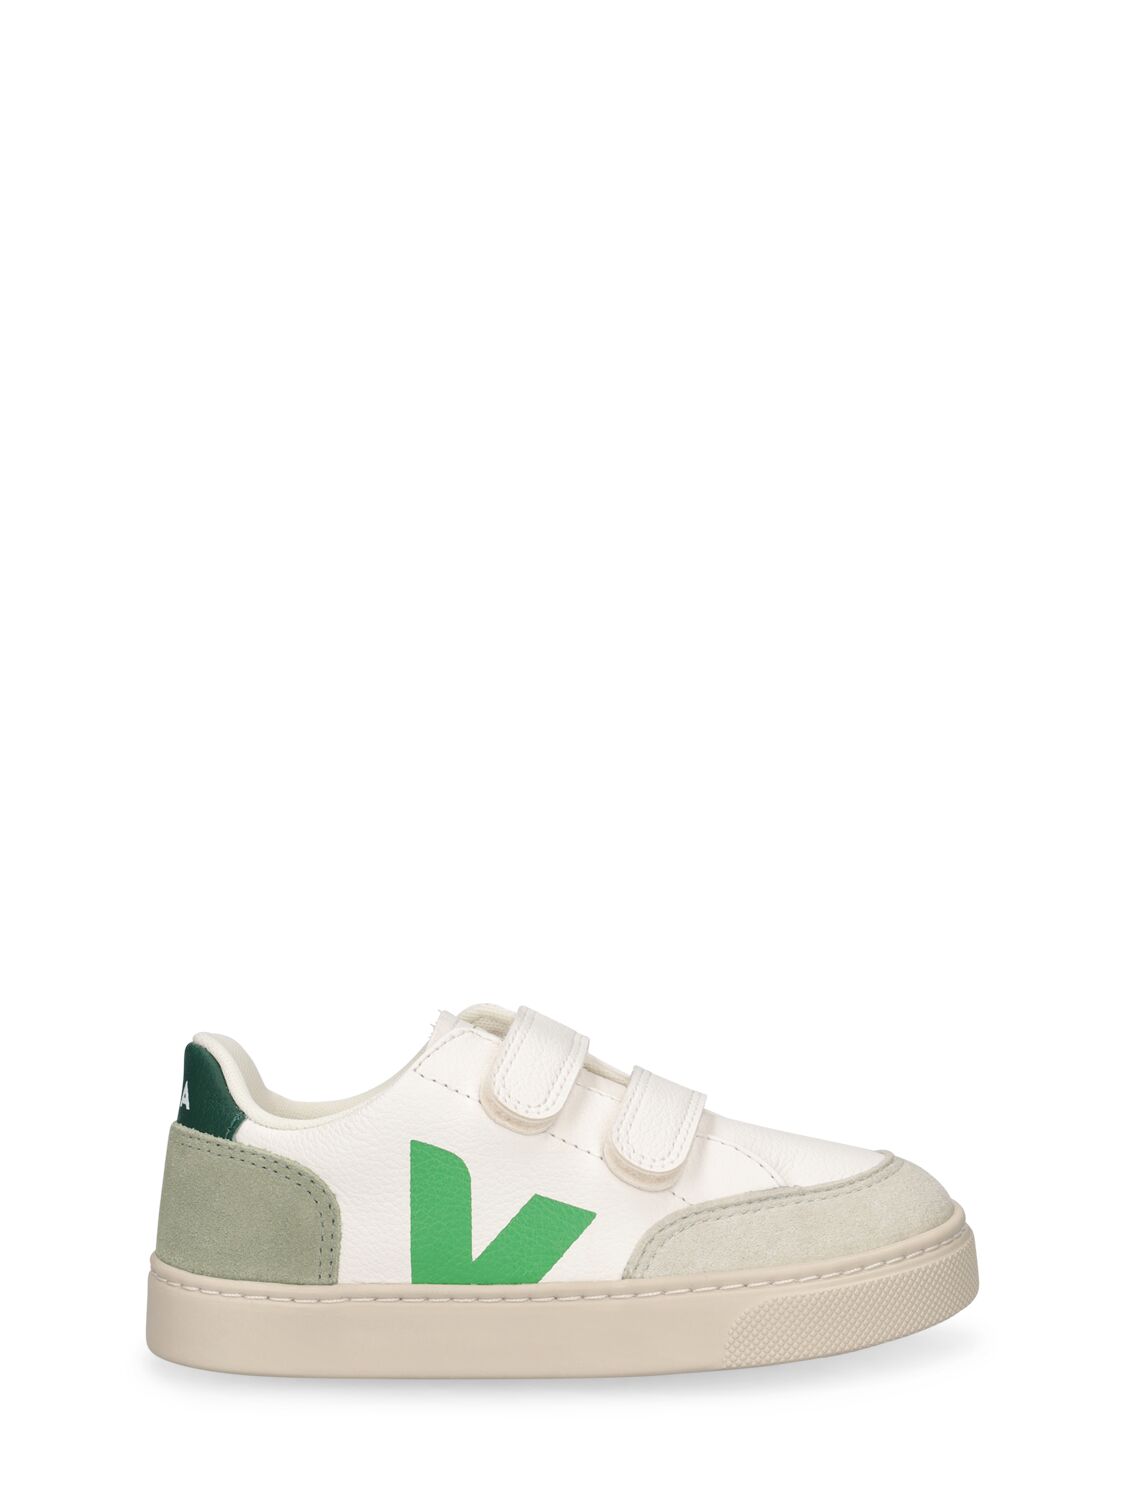 Veja Kids' V-12 Chrome-free Leather Trainers In White,green